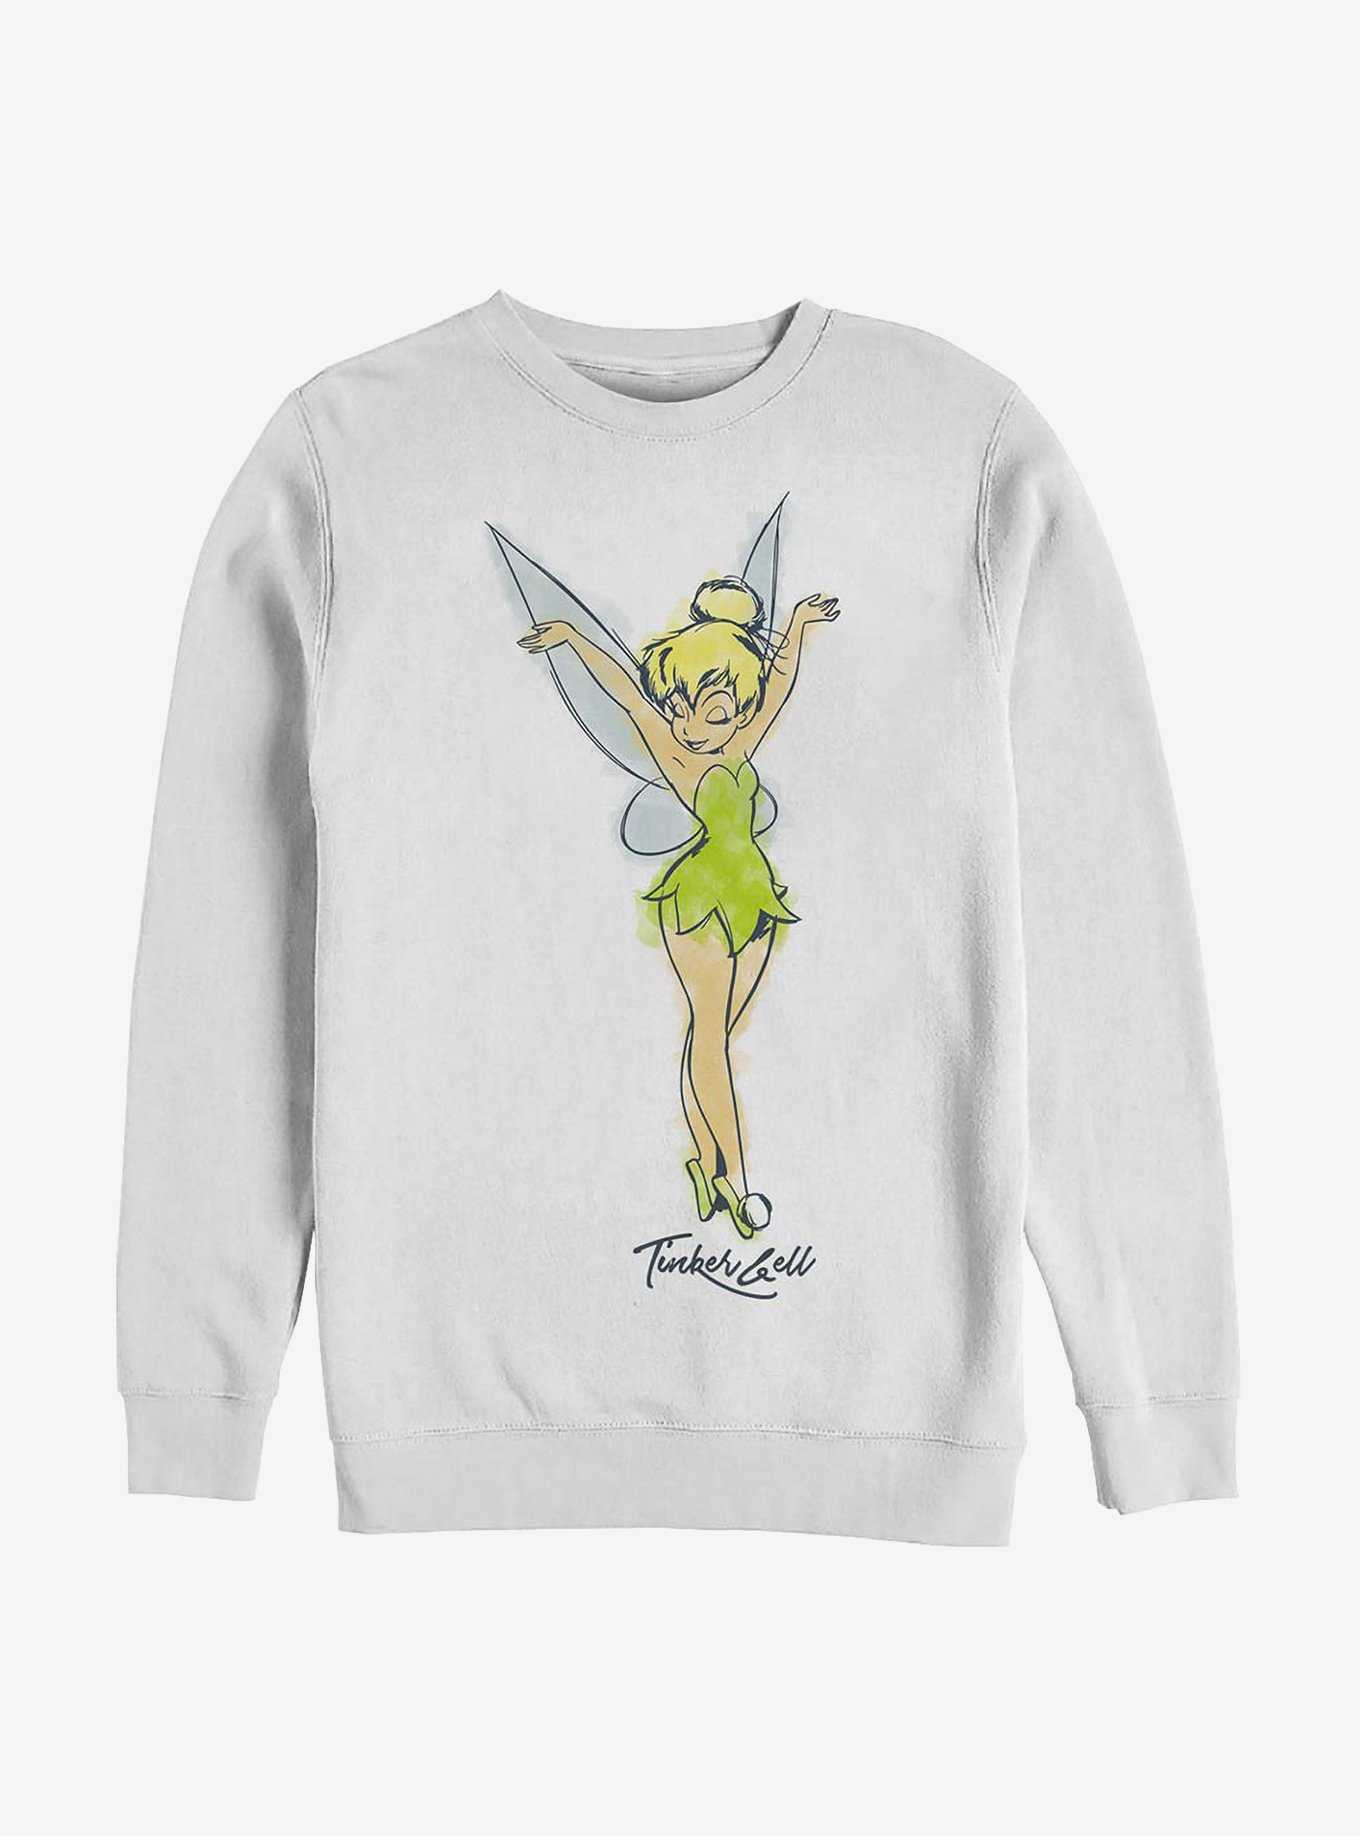 OFFICIAL Peter Pan Merchandise, Shirts Topic & Hot More 